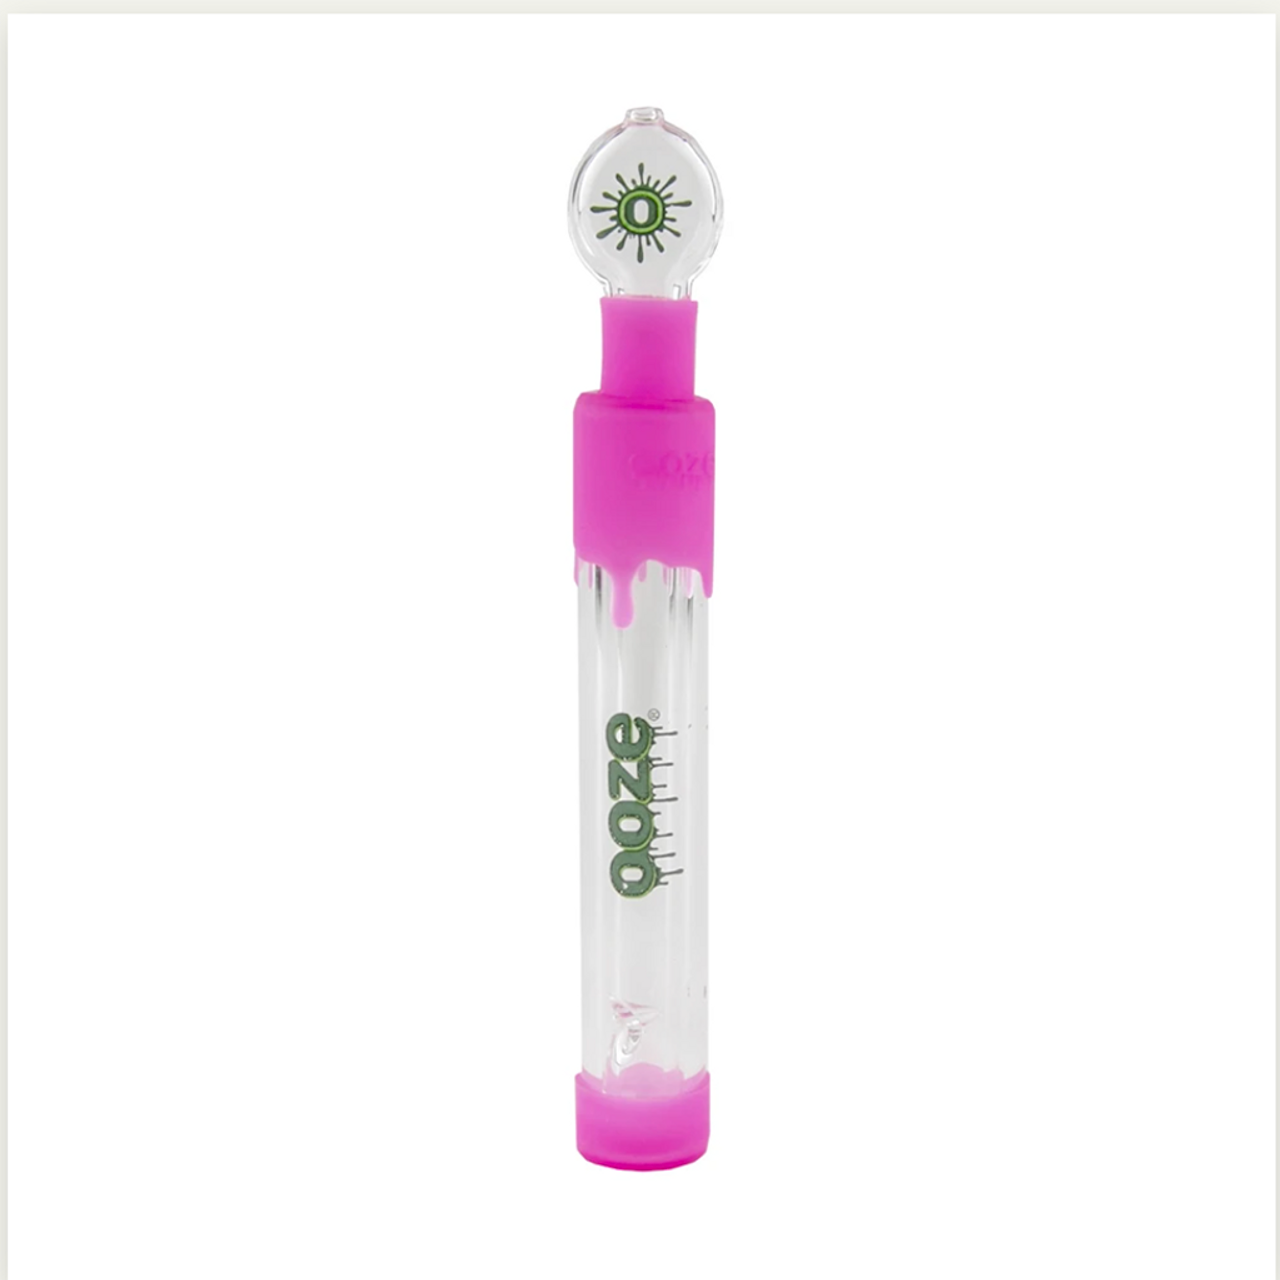 Ooze Slider Glass Blunt for retail stores in pink color